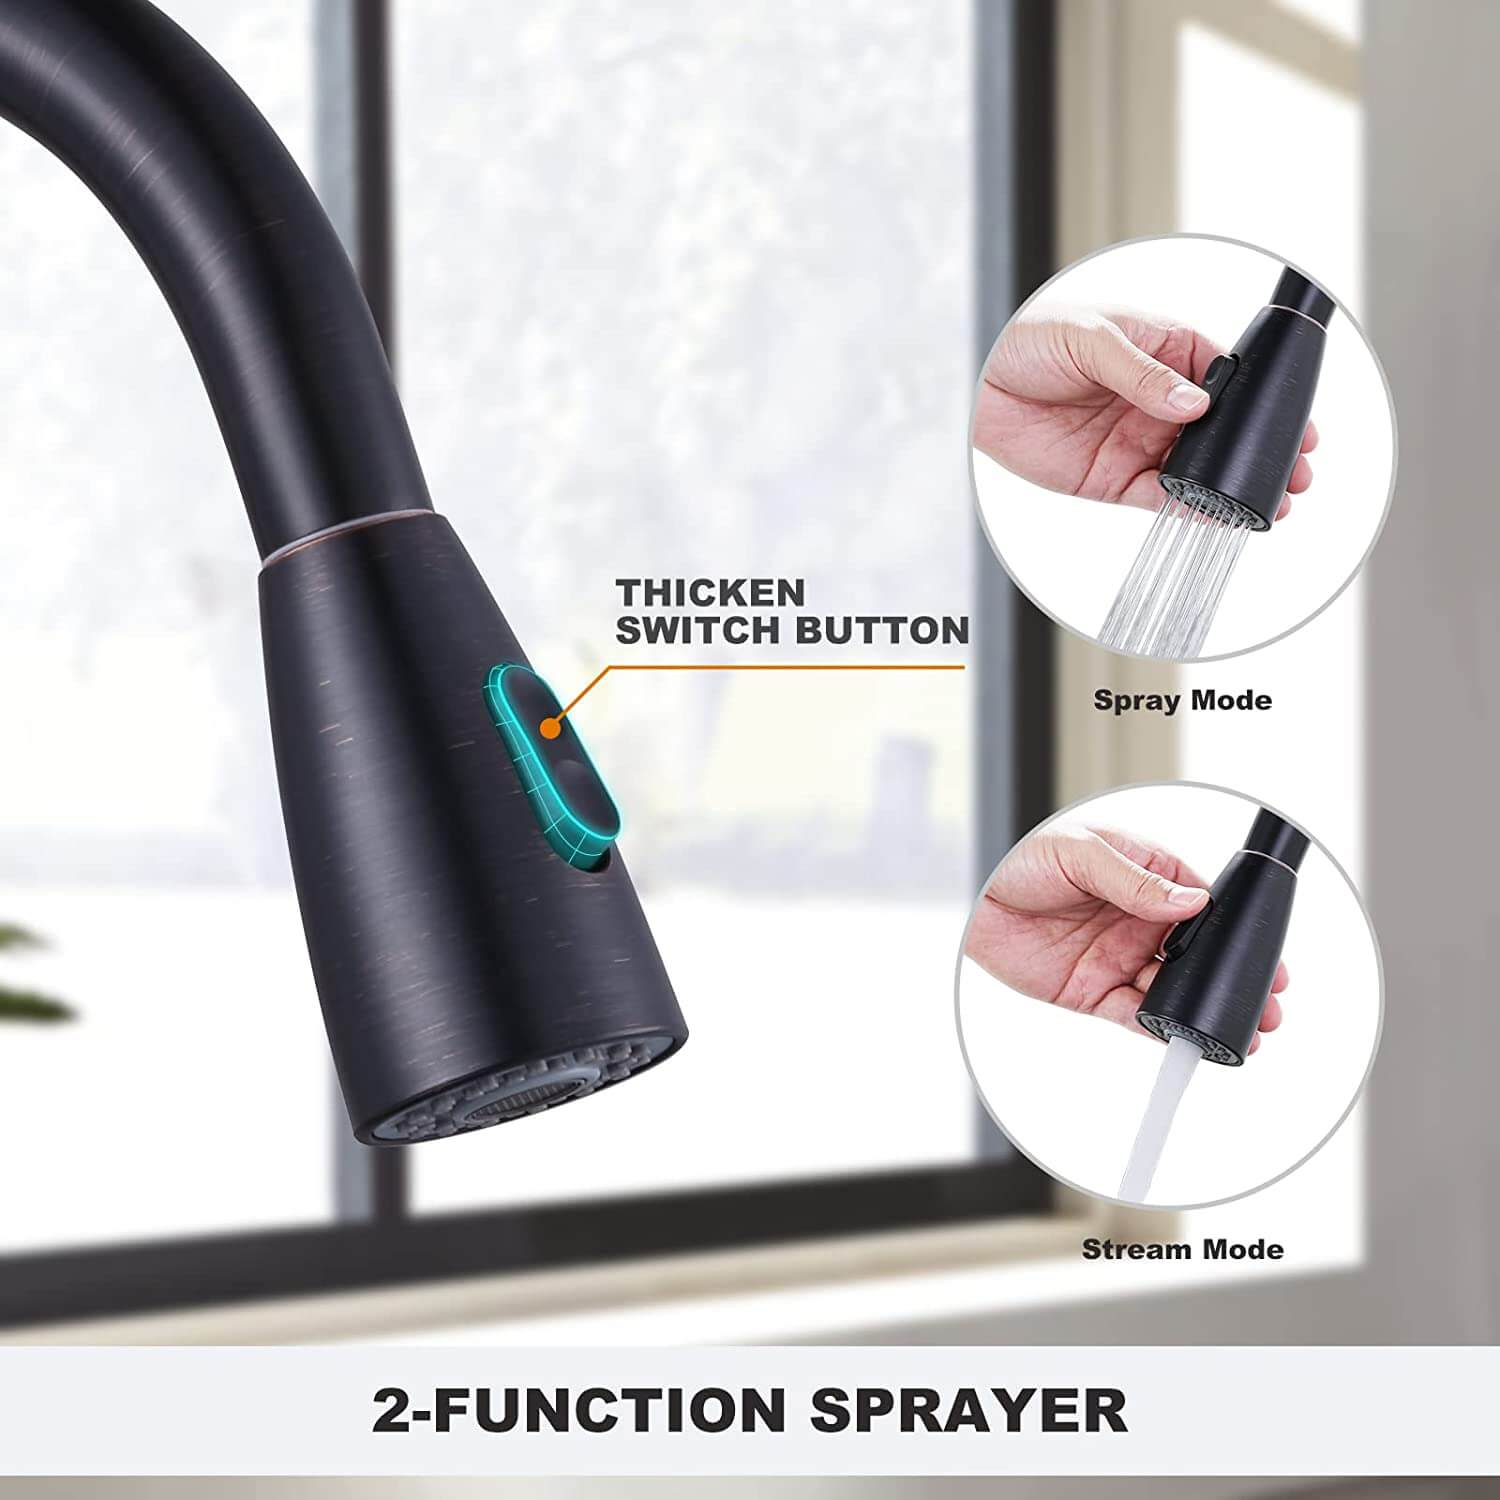 oil rubbed bronze kitchen faucet with sprayer